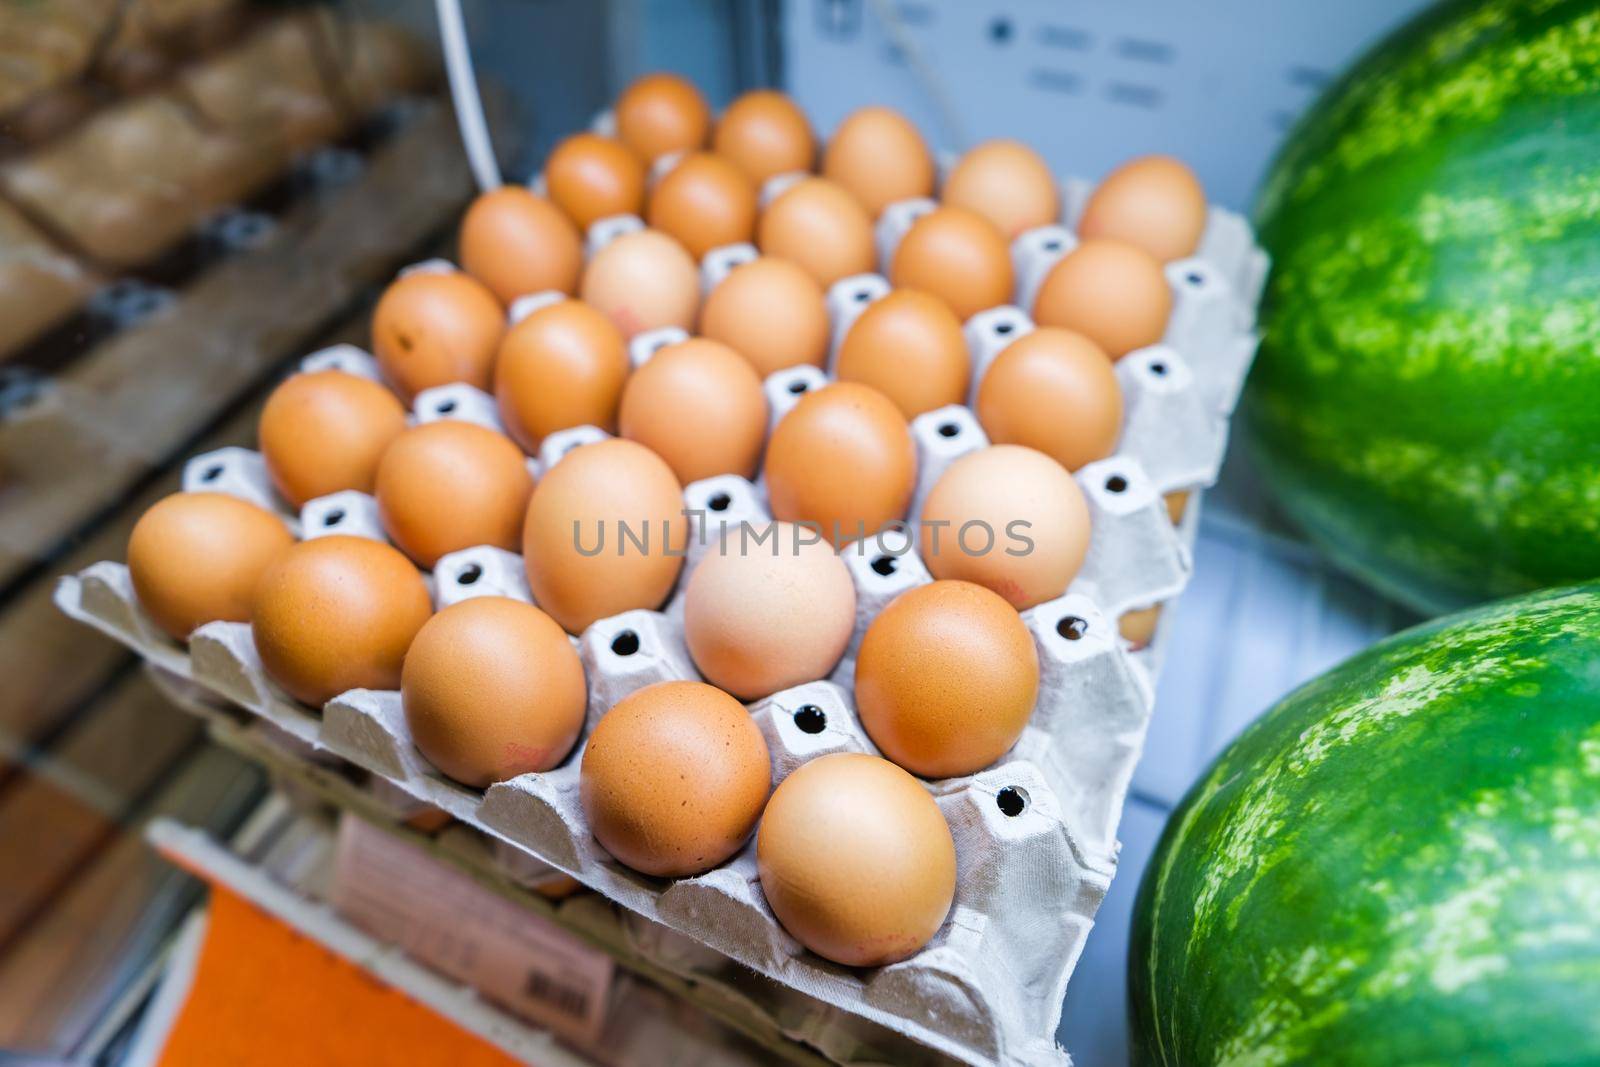 Healthy fruit and vegetables in grocery shop. Close up of basket with eggs in refrigerator.